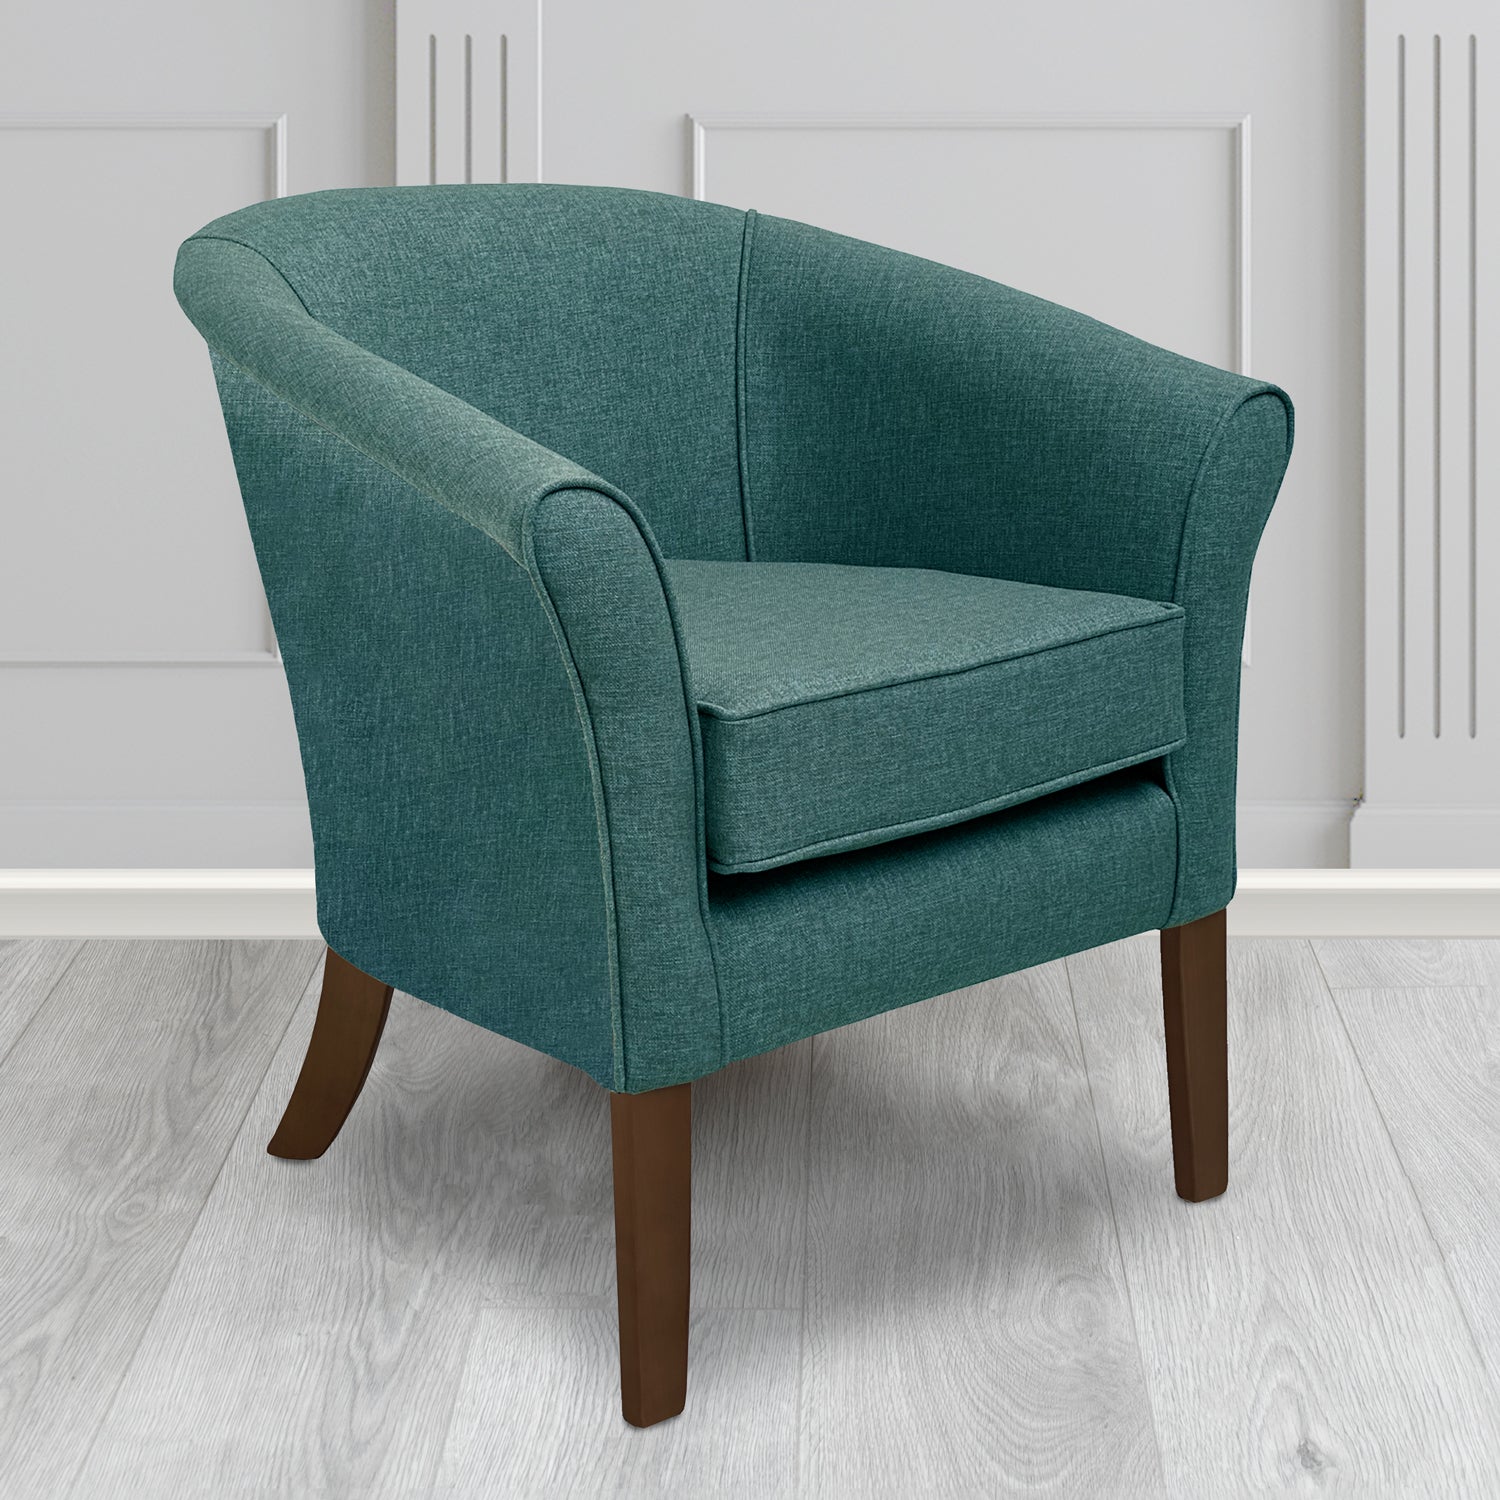 Aspen Tub Chair in Marna 129 Ocean Crib 5 Fabric - Antimicrobial, Stain Resistant & Waterproof - The Tub Chair Shop